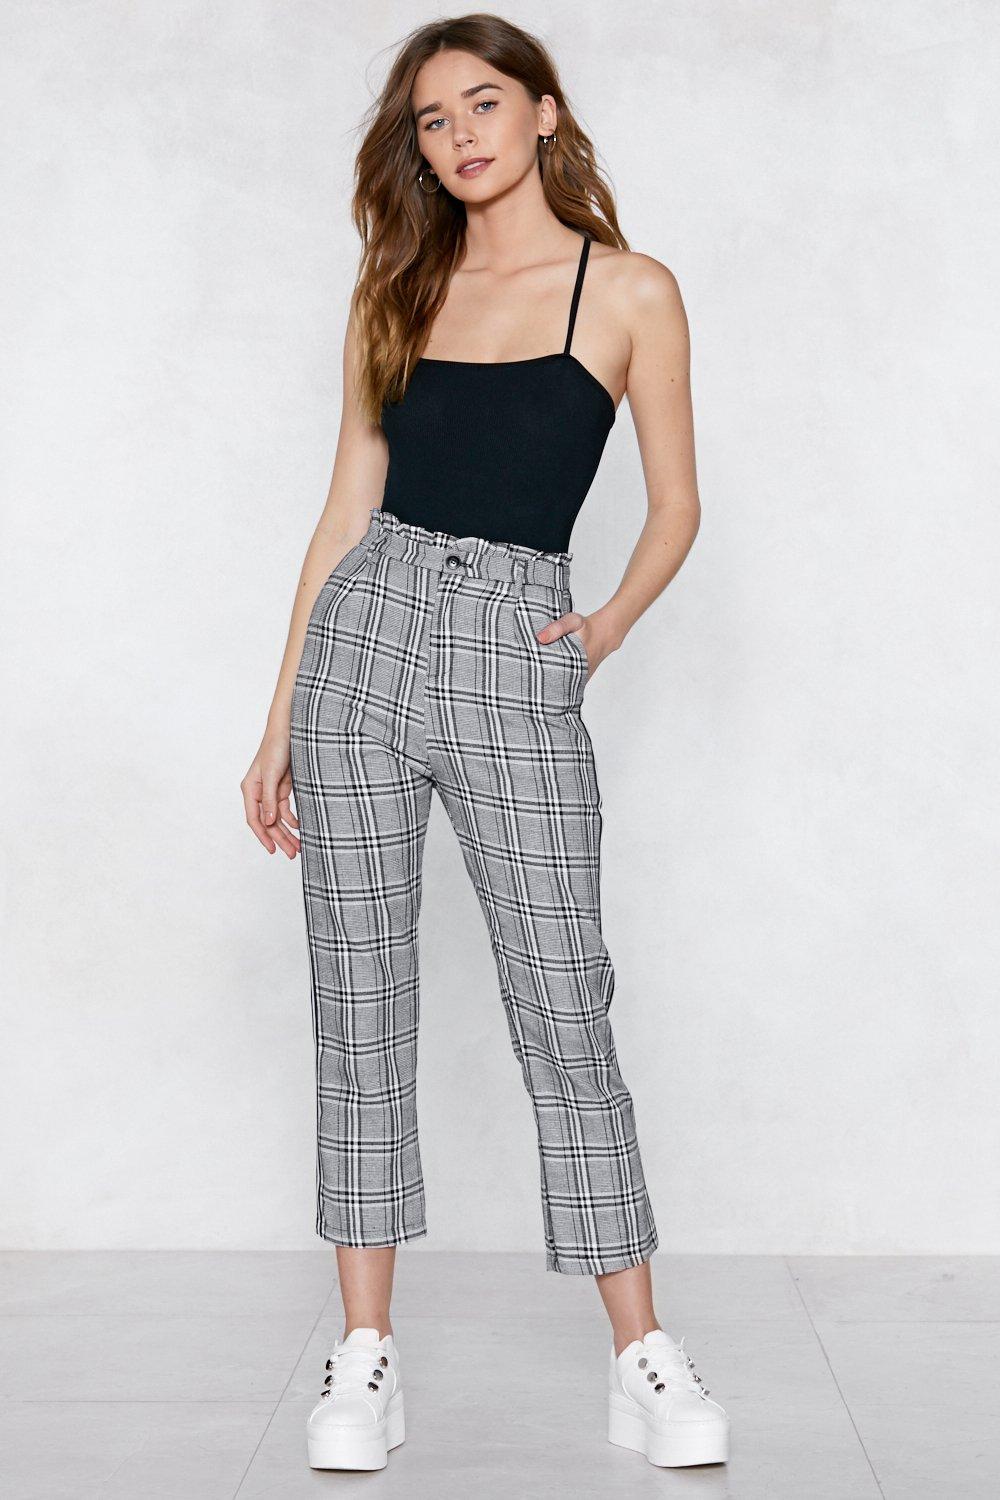 grey and white plaid pants